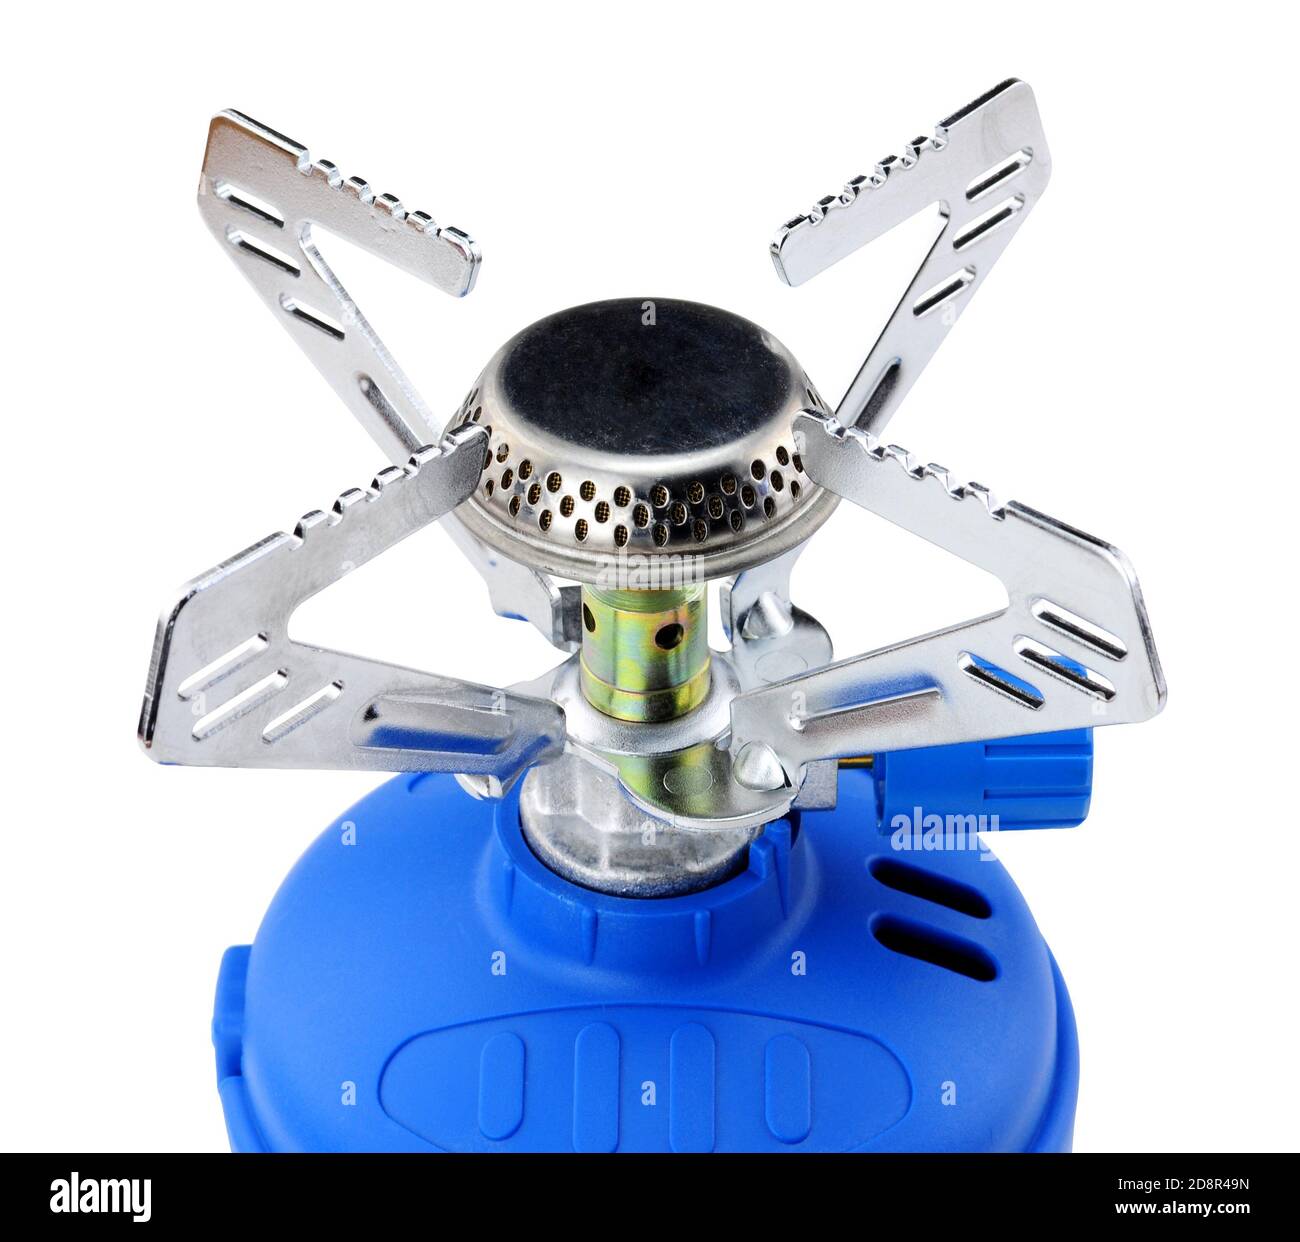 Camping Gas stove with butane gas canister Stock Photo - Alamy